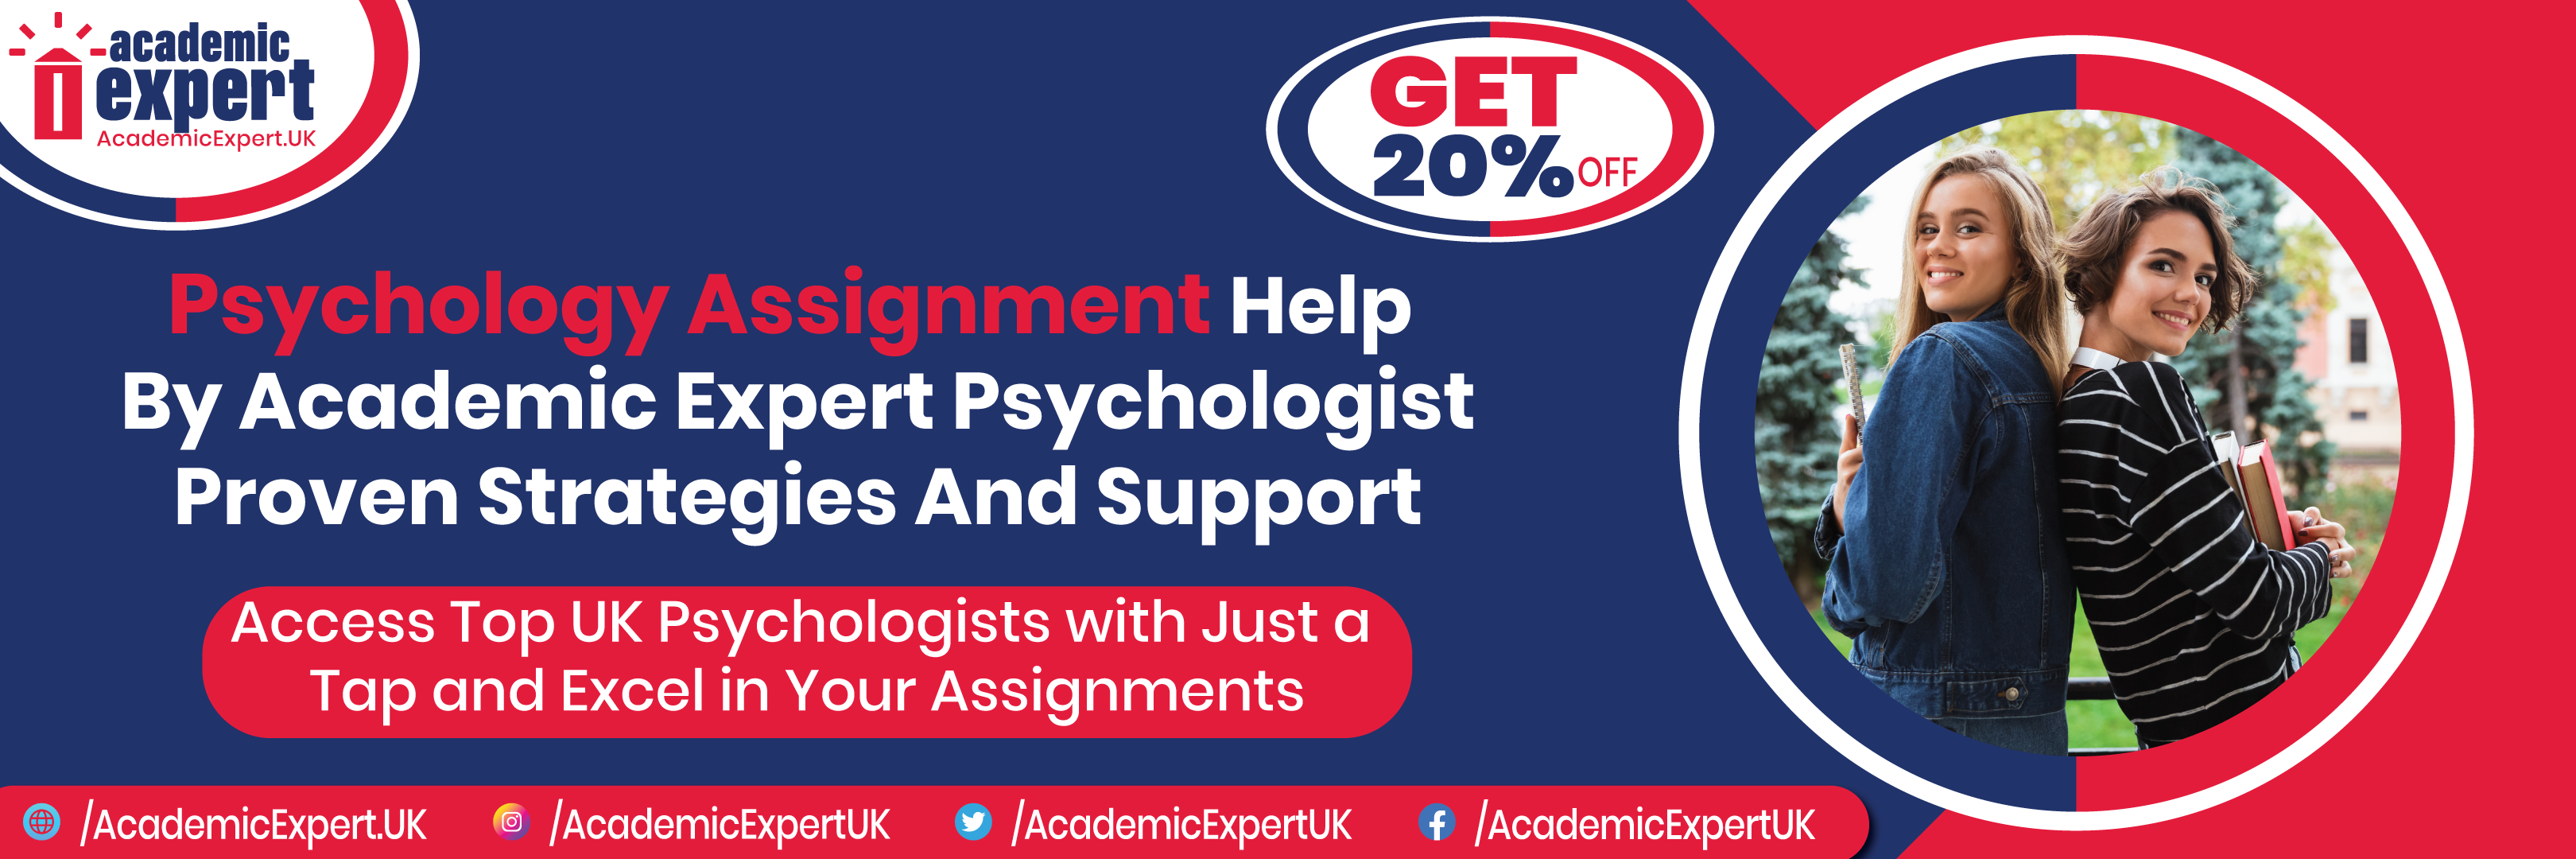 Psychology Assignment Help By Academic Expert Psychologist
Proven Strategies And Support